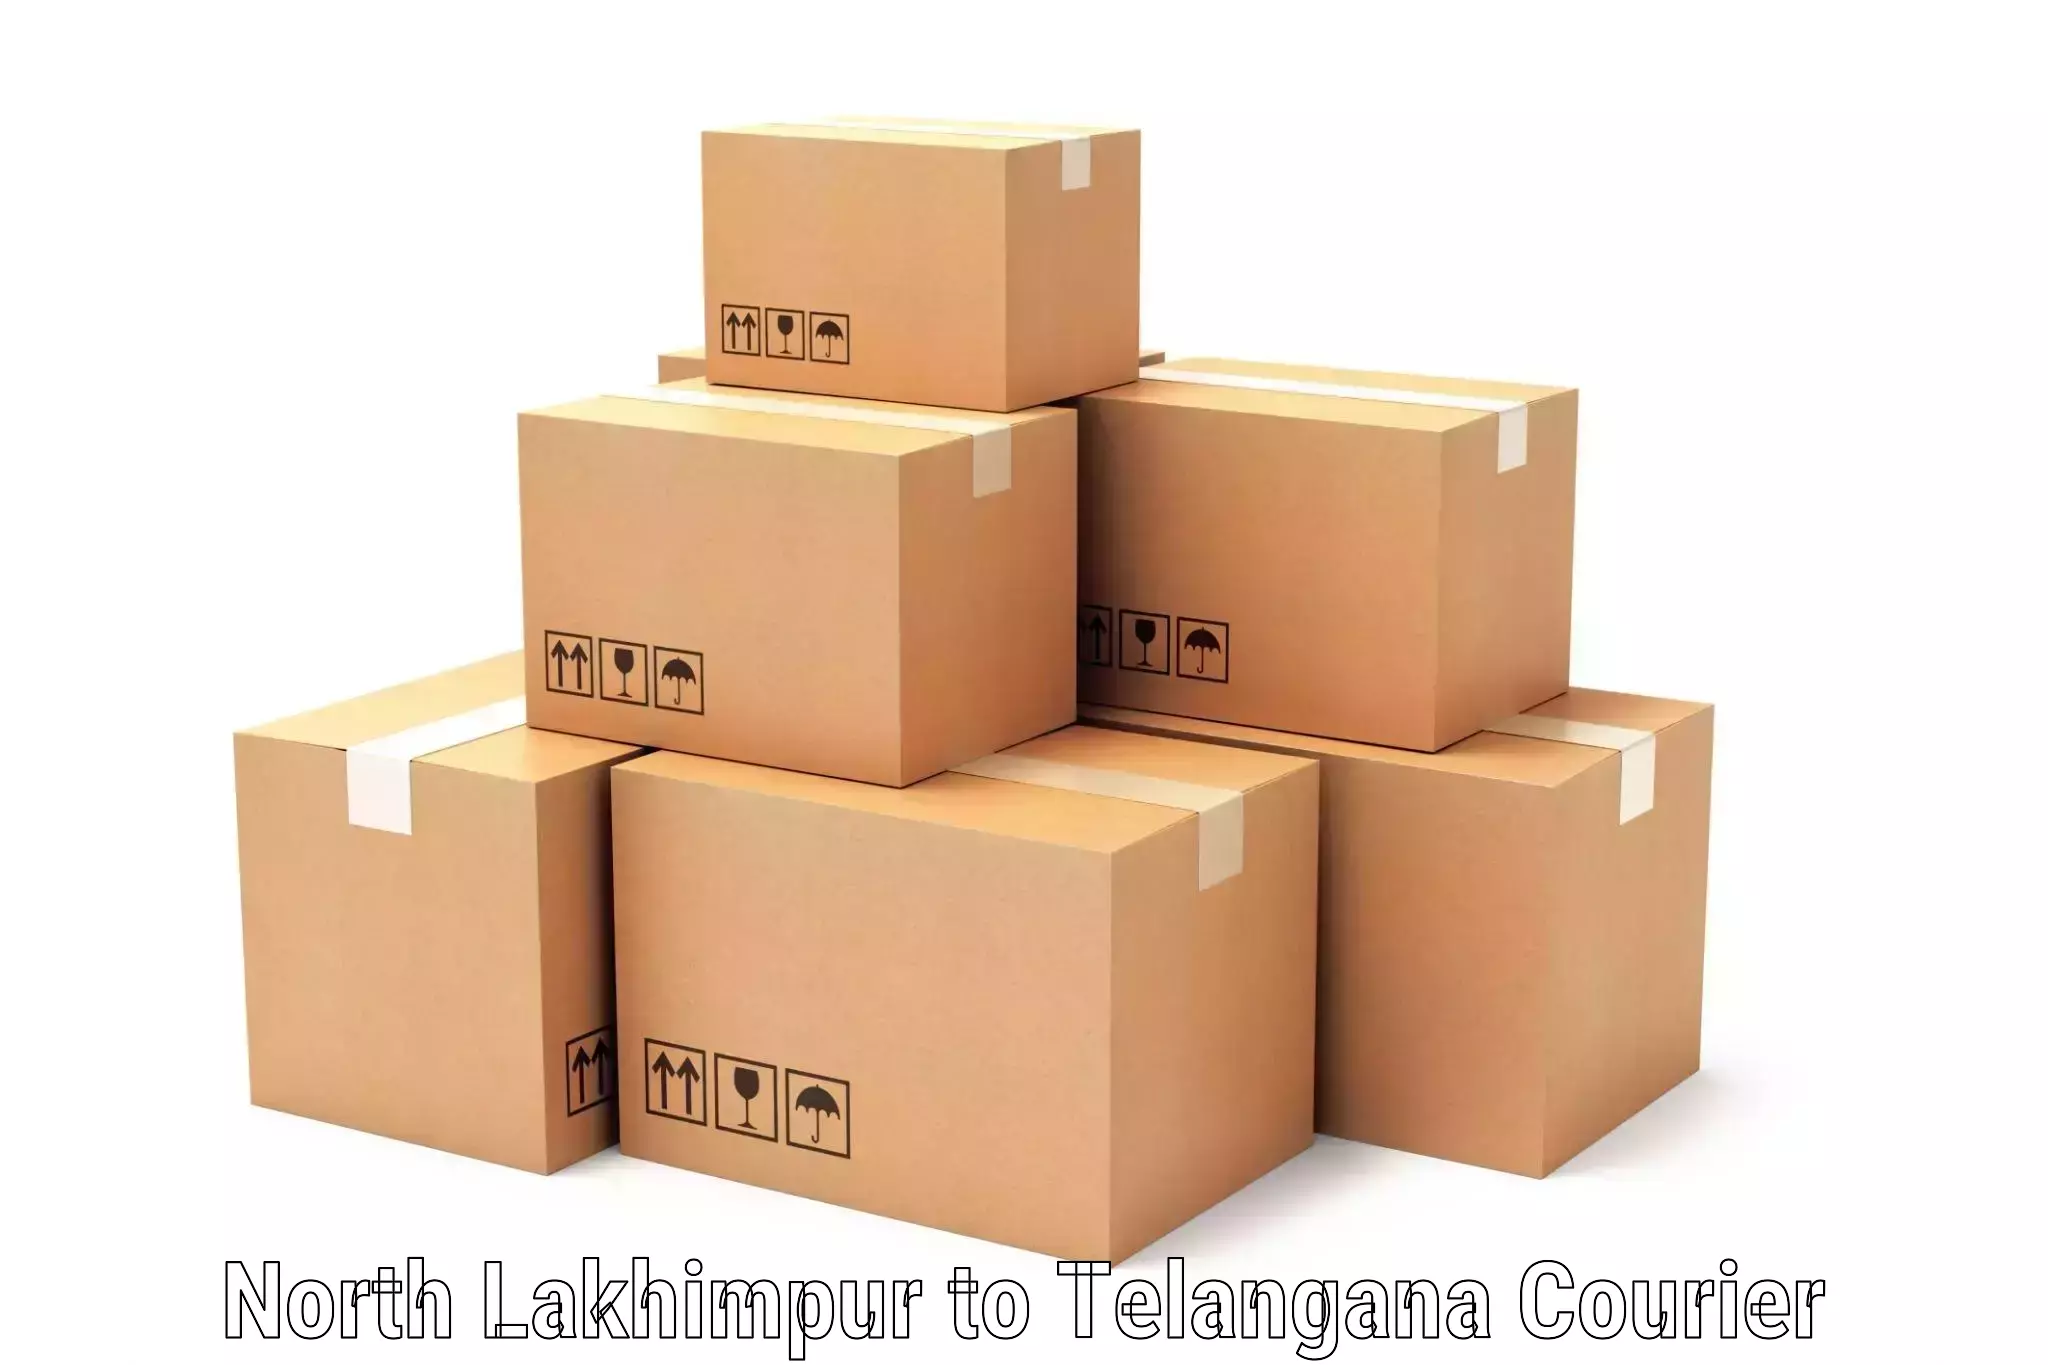 24-hour courier service in North Lakhimpur to Sadashivpet